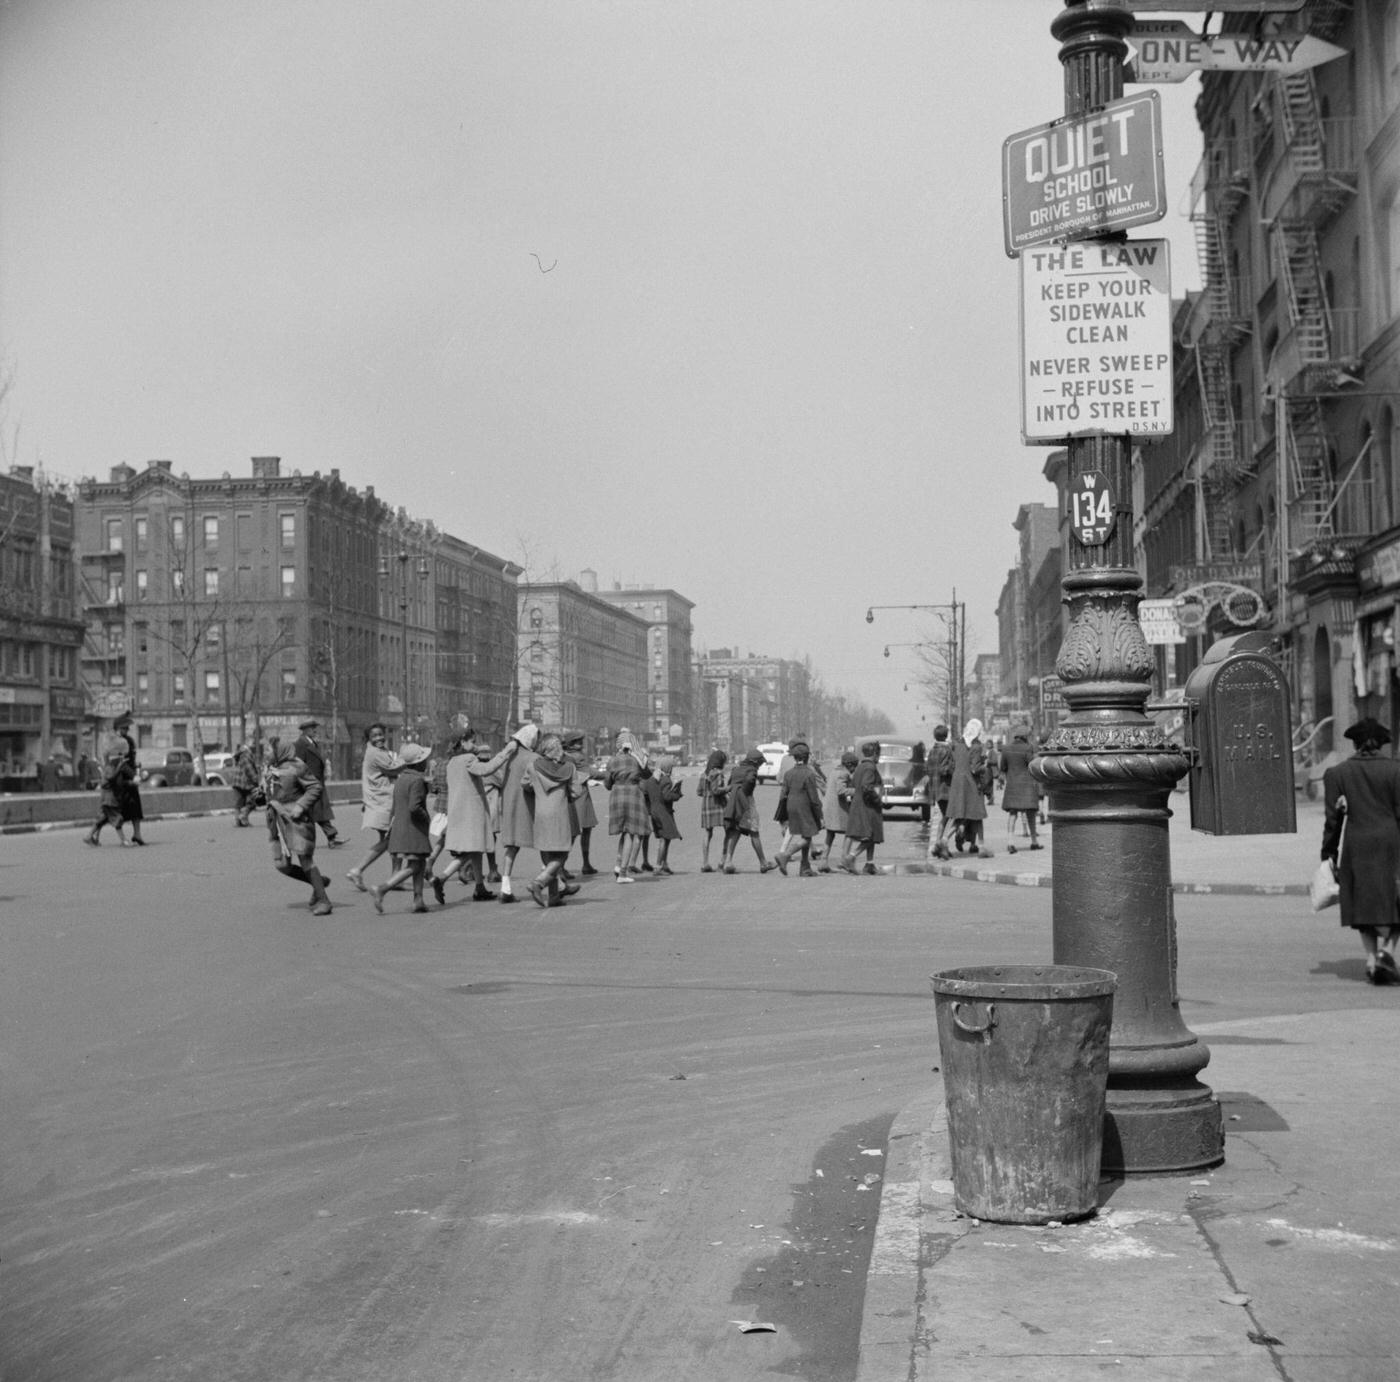 Many Accidents Are Attributed To Unpatrolled Intersections In Harlem, Manhattan, 1940.